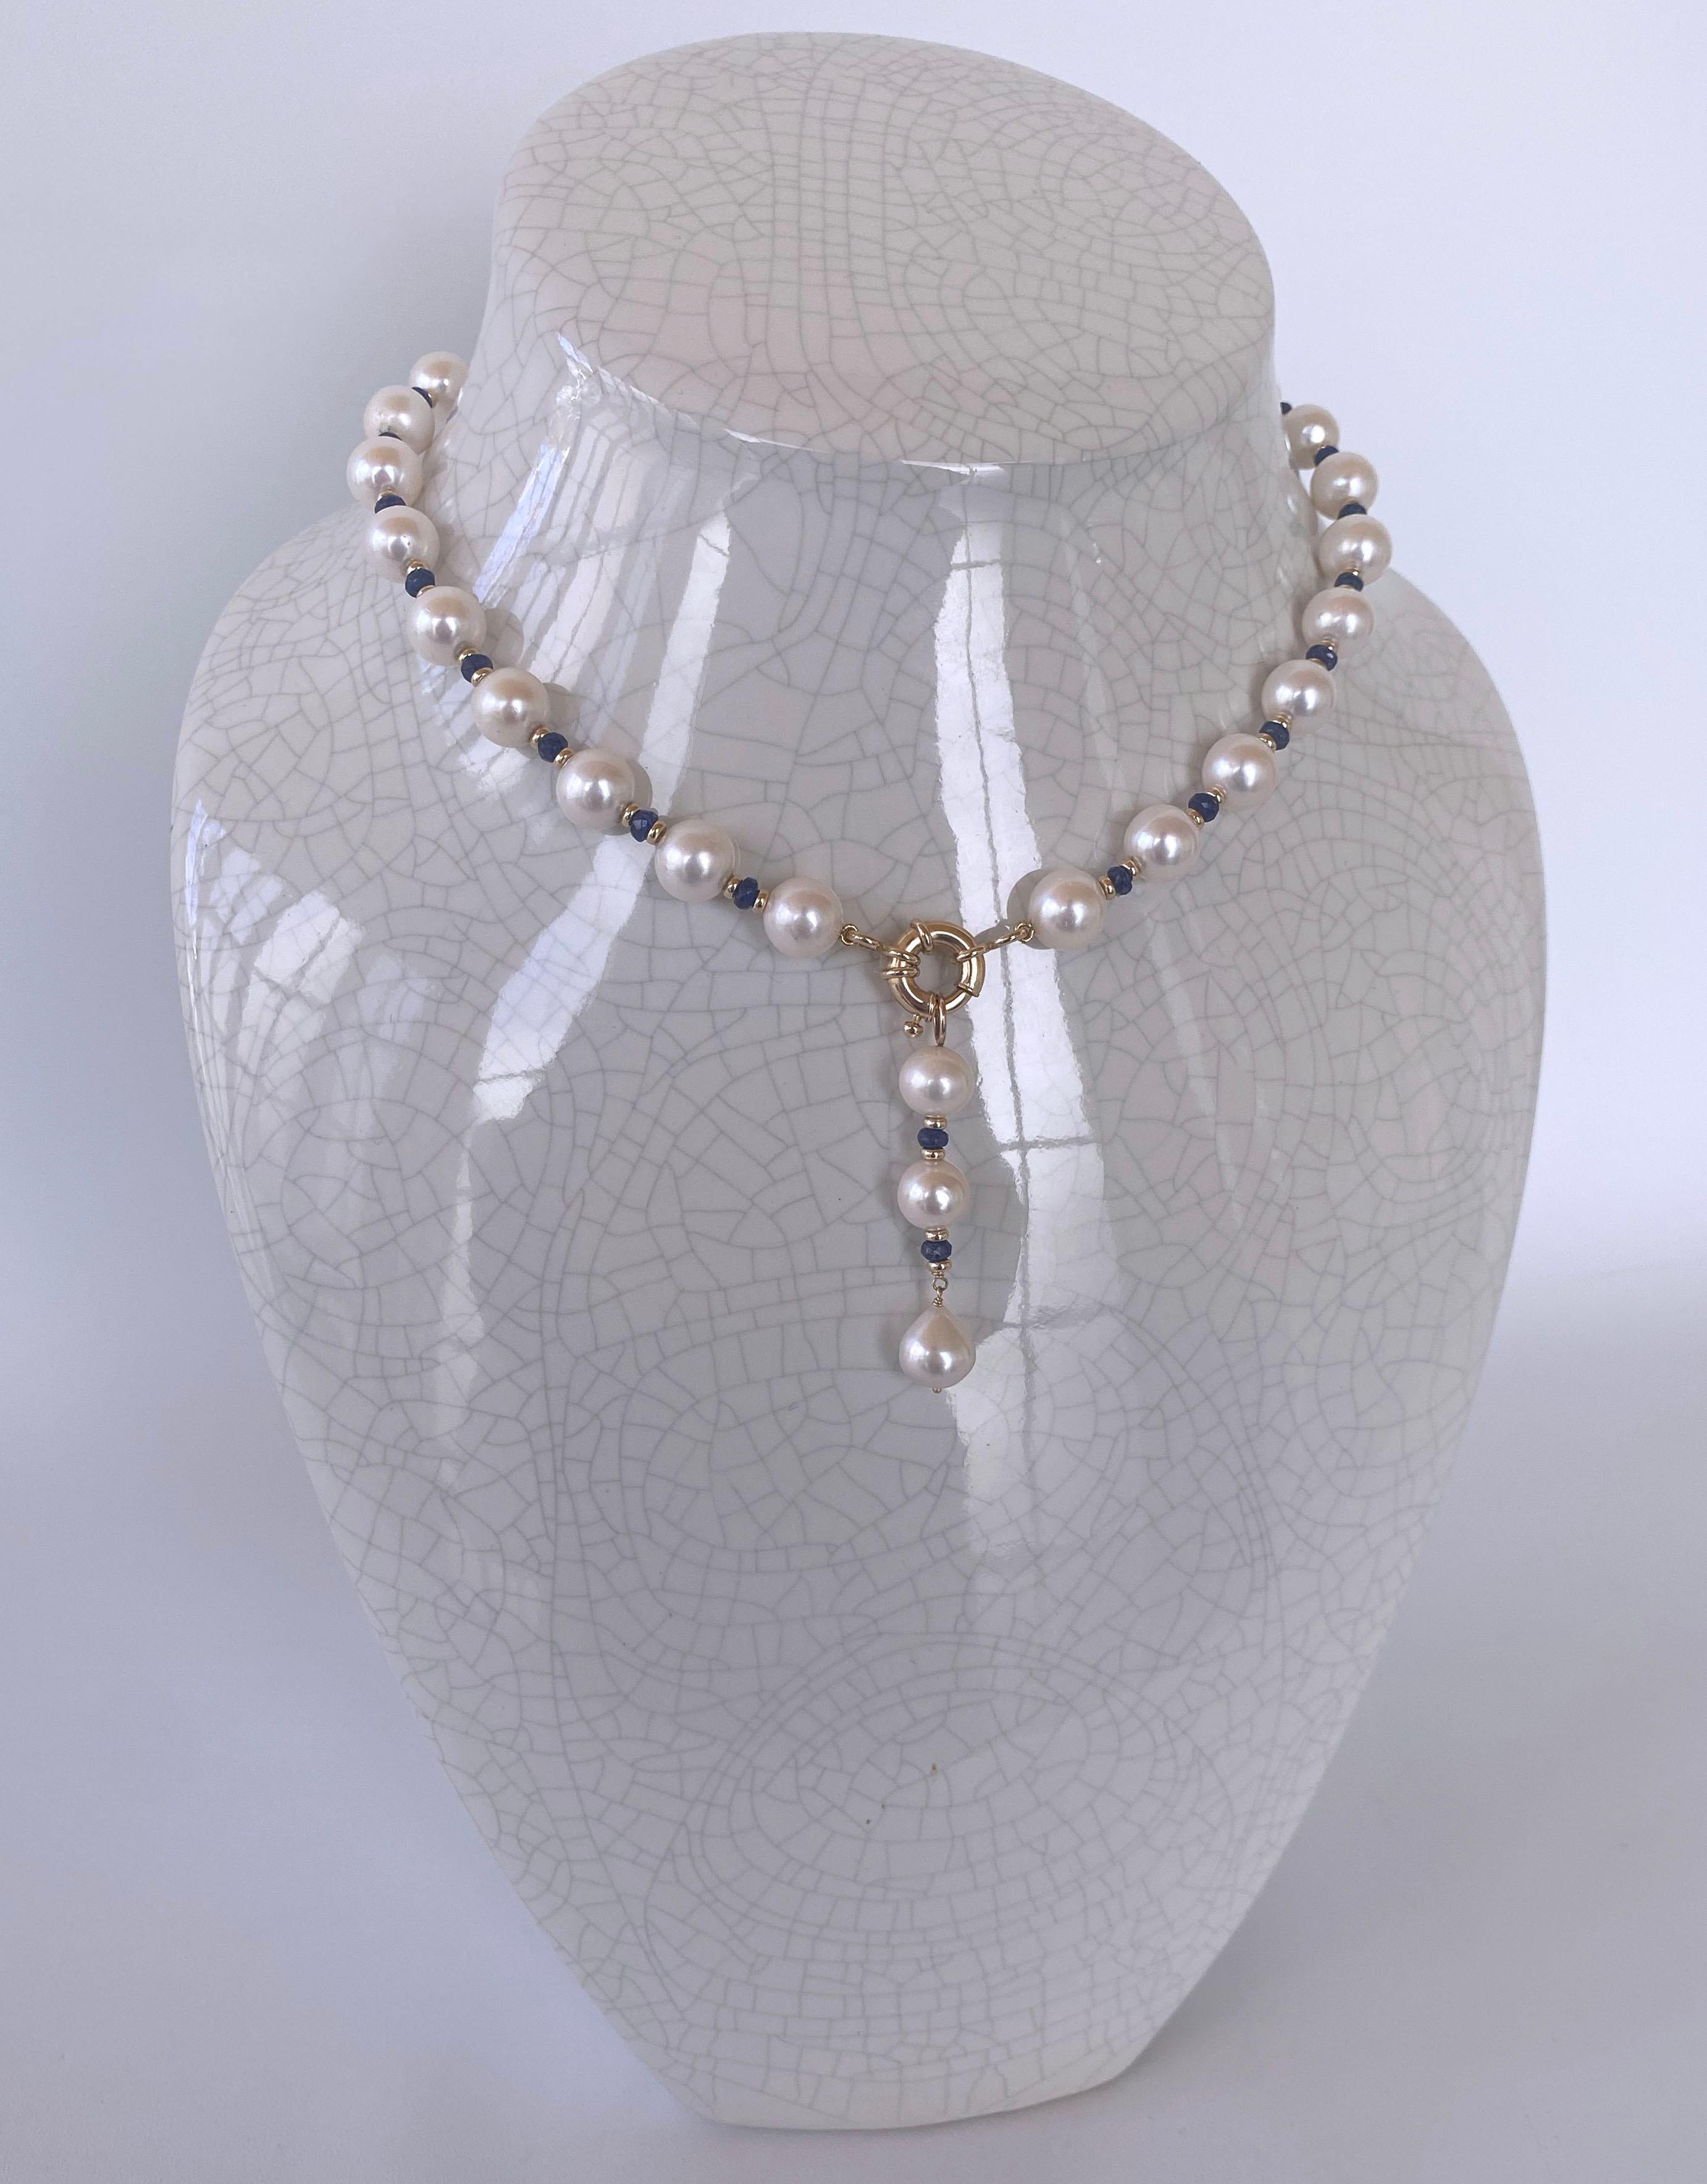 Beautiful piece by Marina J. This lovely necklace features high luster white/cream colored Cultured Pearls, all wonderfully accented by faceted precious Blue Sapphire stones. The faceted Sapphires are held in between 14k Yellow Gold findings which